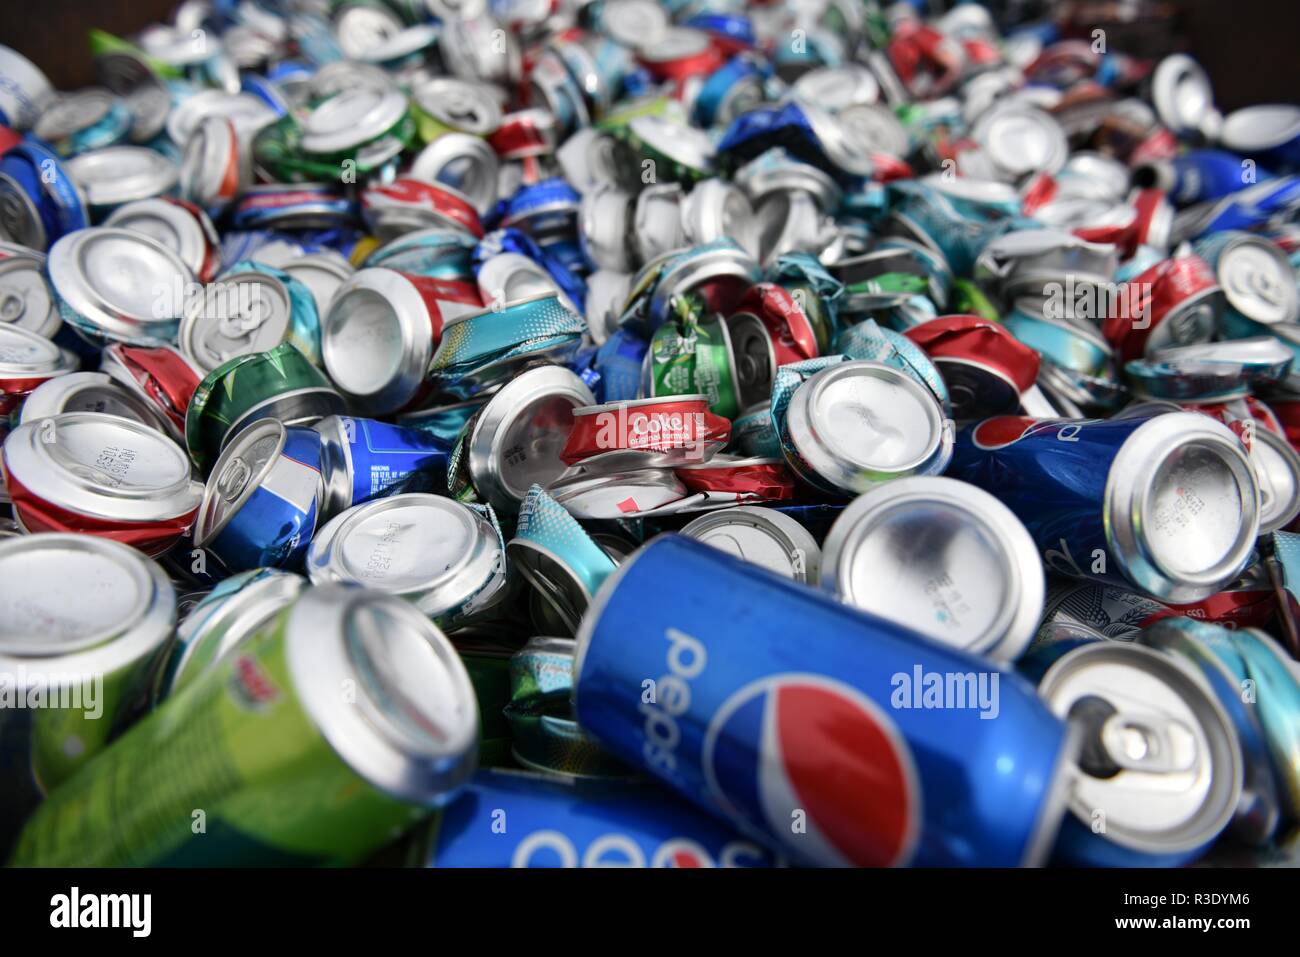 Aluminum Can Recycling, large pile of smashed, crushed, discarded empty soft drink or soda aluminum beverage cans Stock Photo